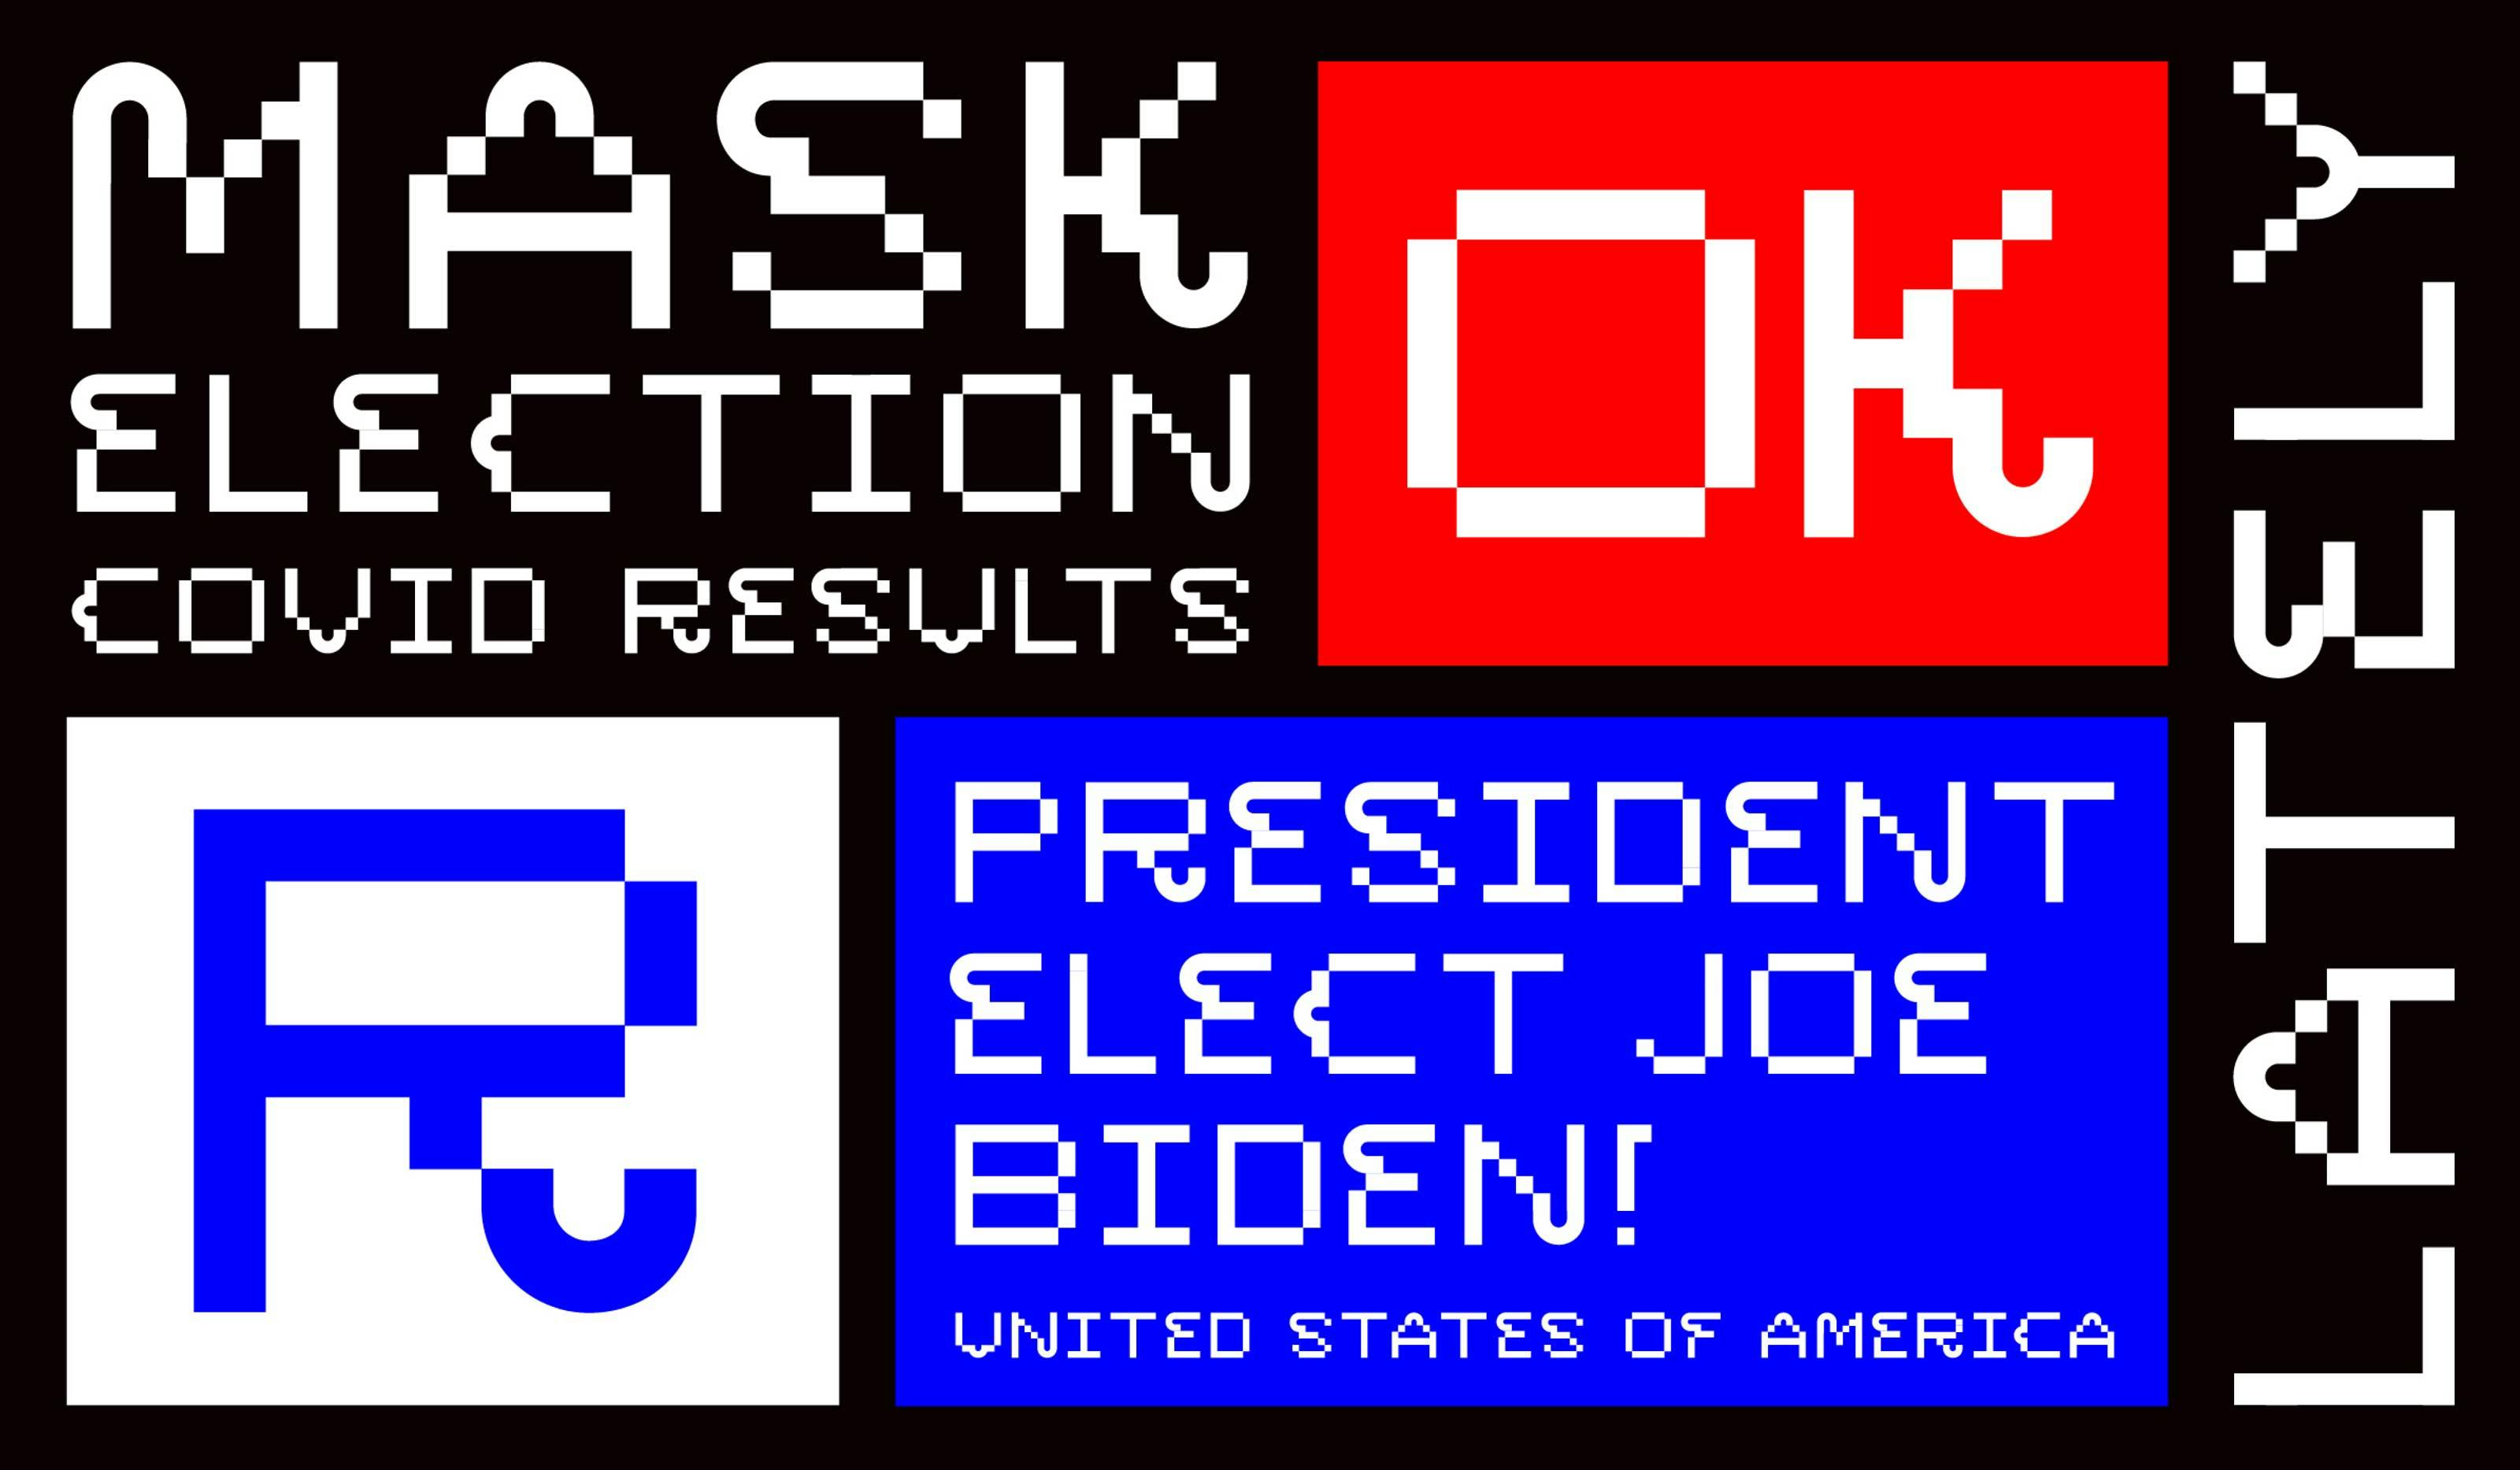 Custom-typography-pixelated-and-using-primary-colors-to-talk-about-politics-and-covid.jpg